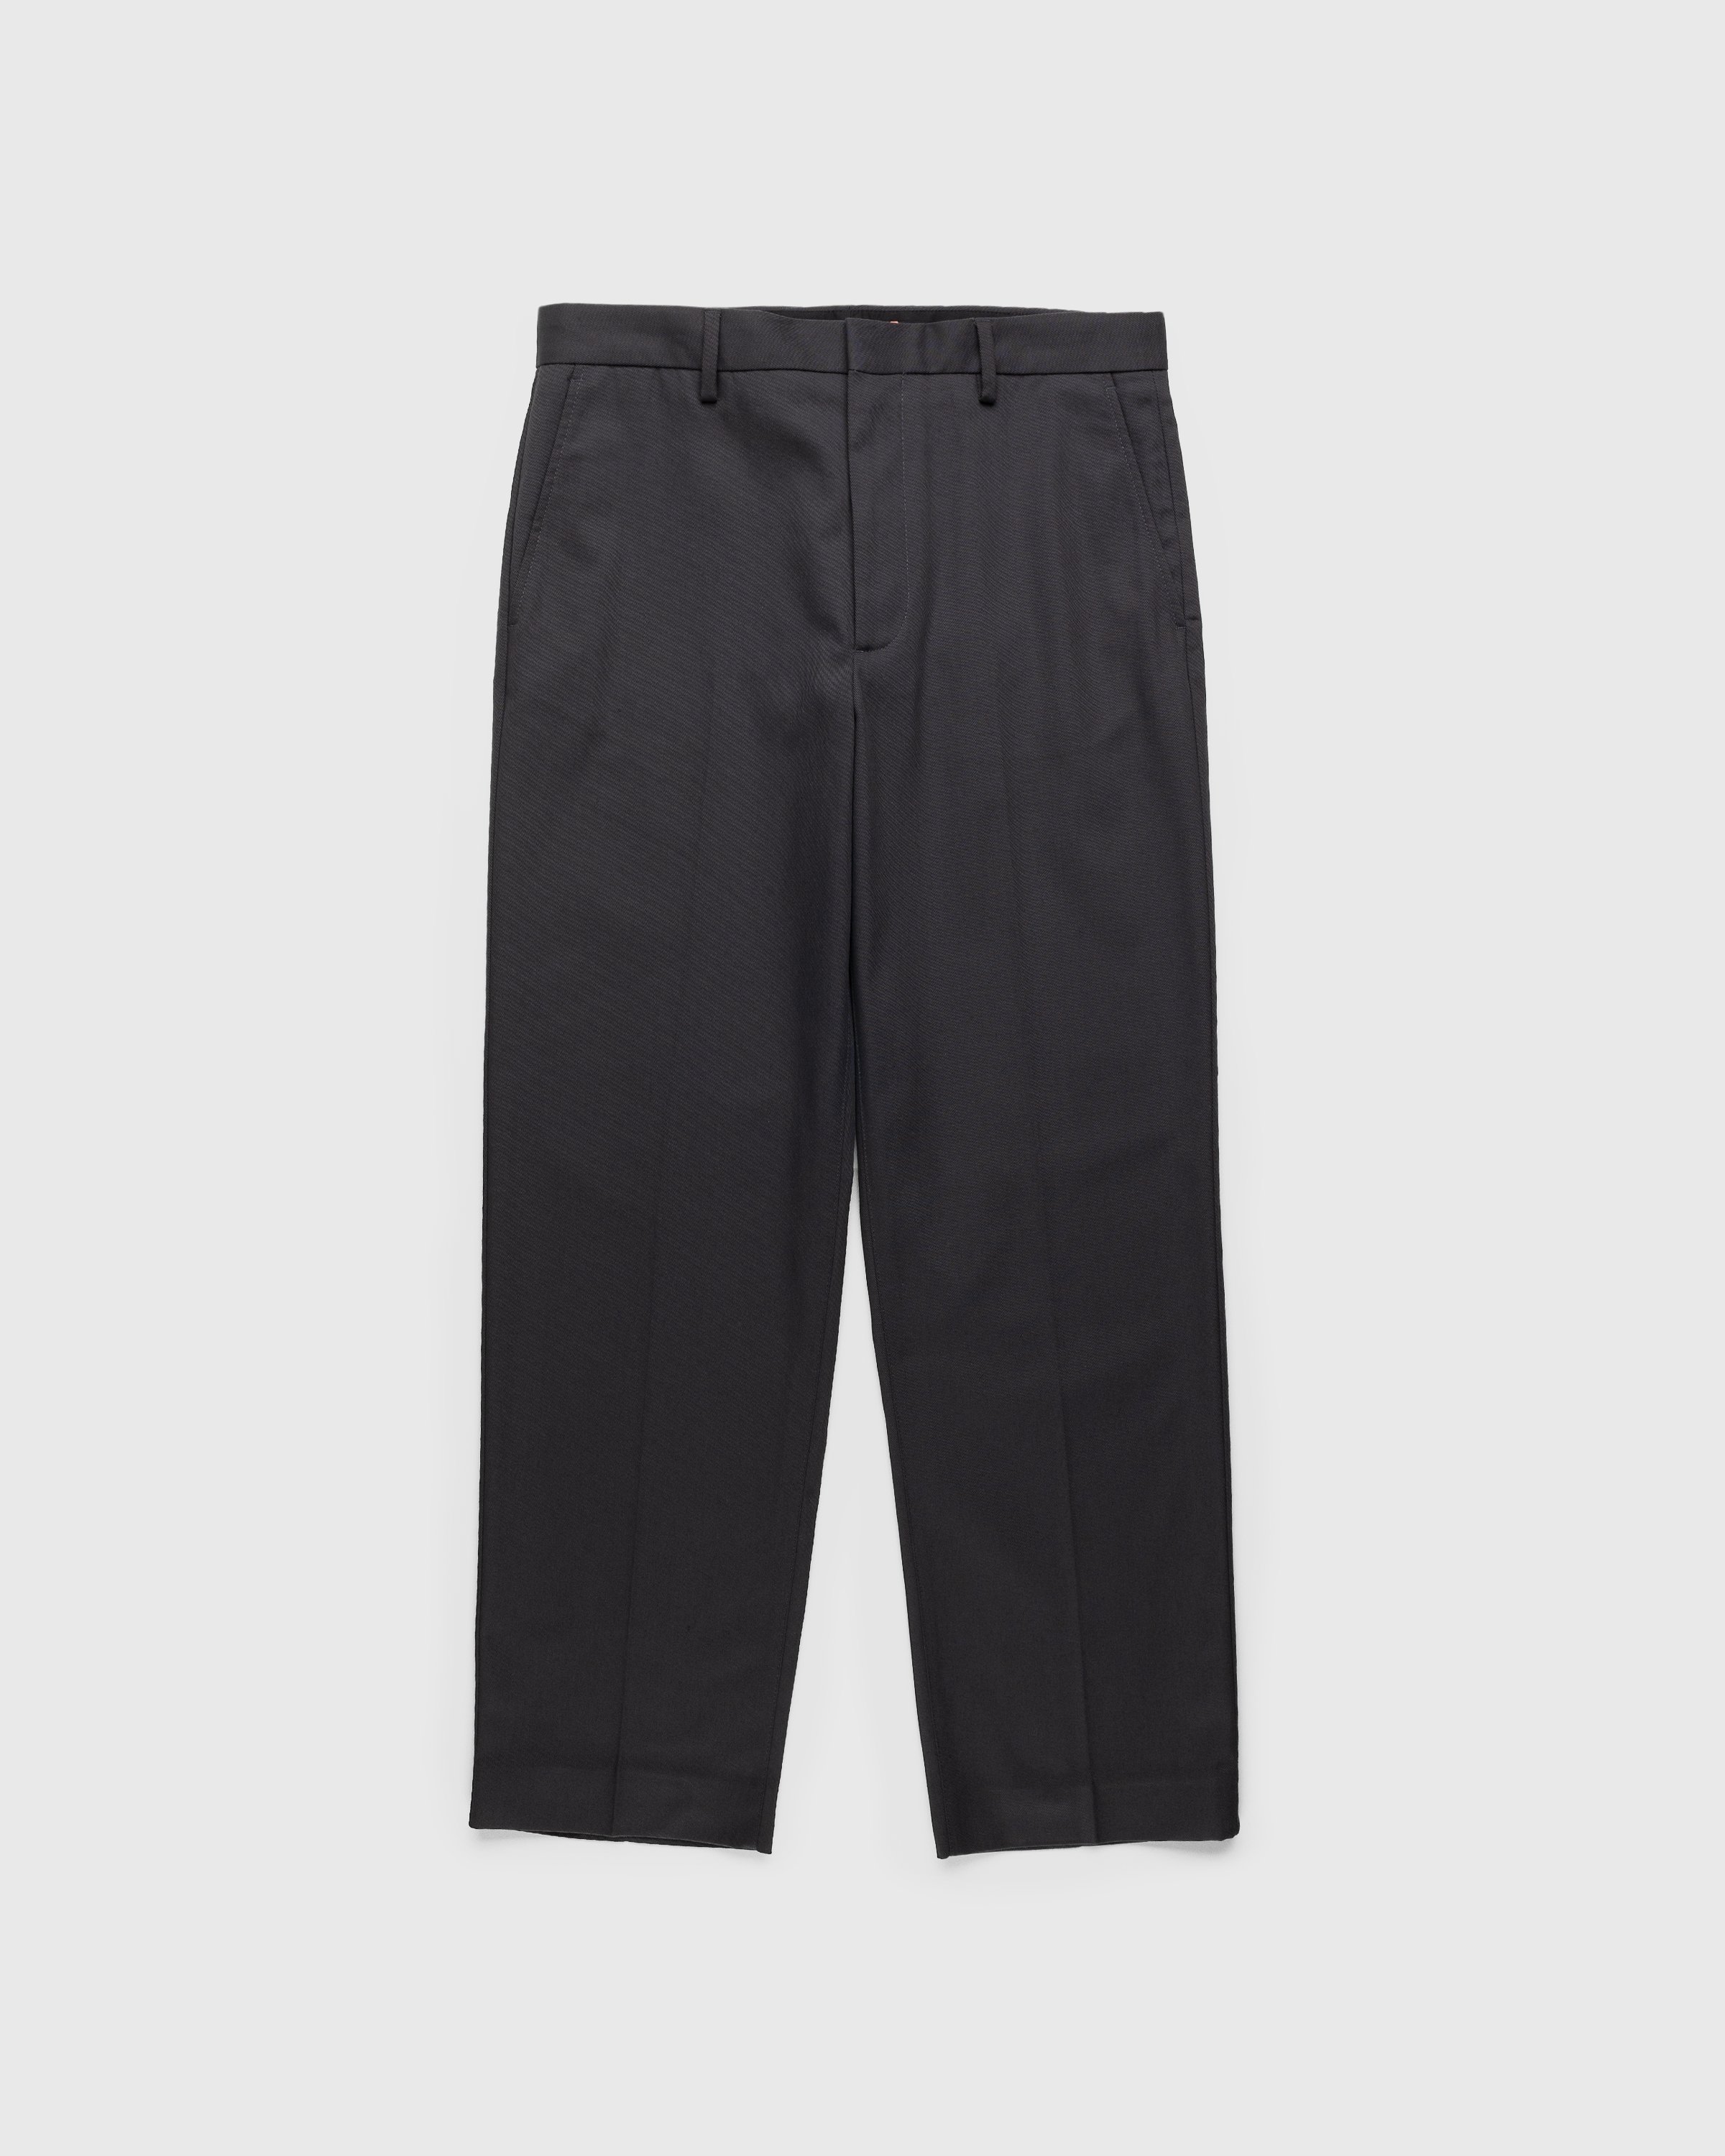 Acne Studios - Casual Trousers Anthracite Grey - Clothing - Grey - Image 1